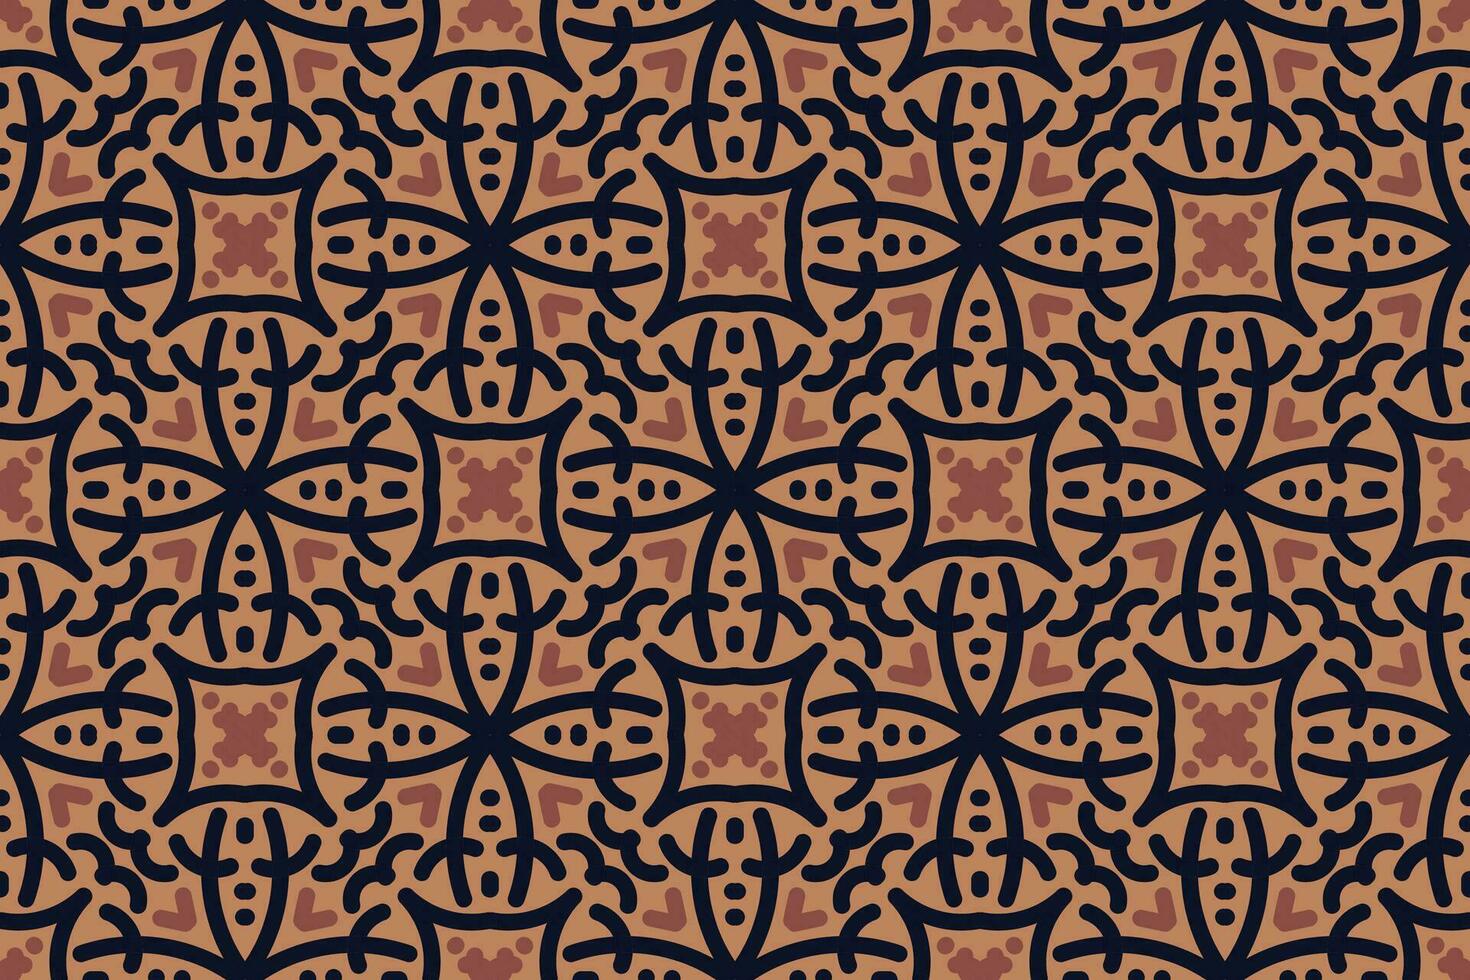 ornamental seamless pattern ornaments in traditional arabian, moroccan, turkish style. vintage abstract floral background texture. Modern minimal labels. Premium design concept vector